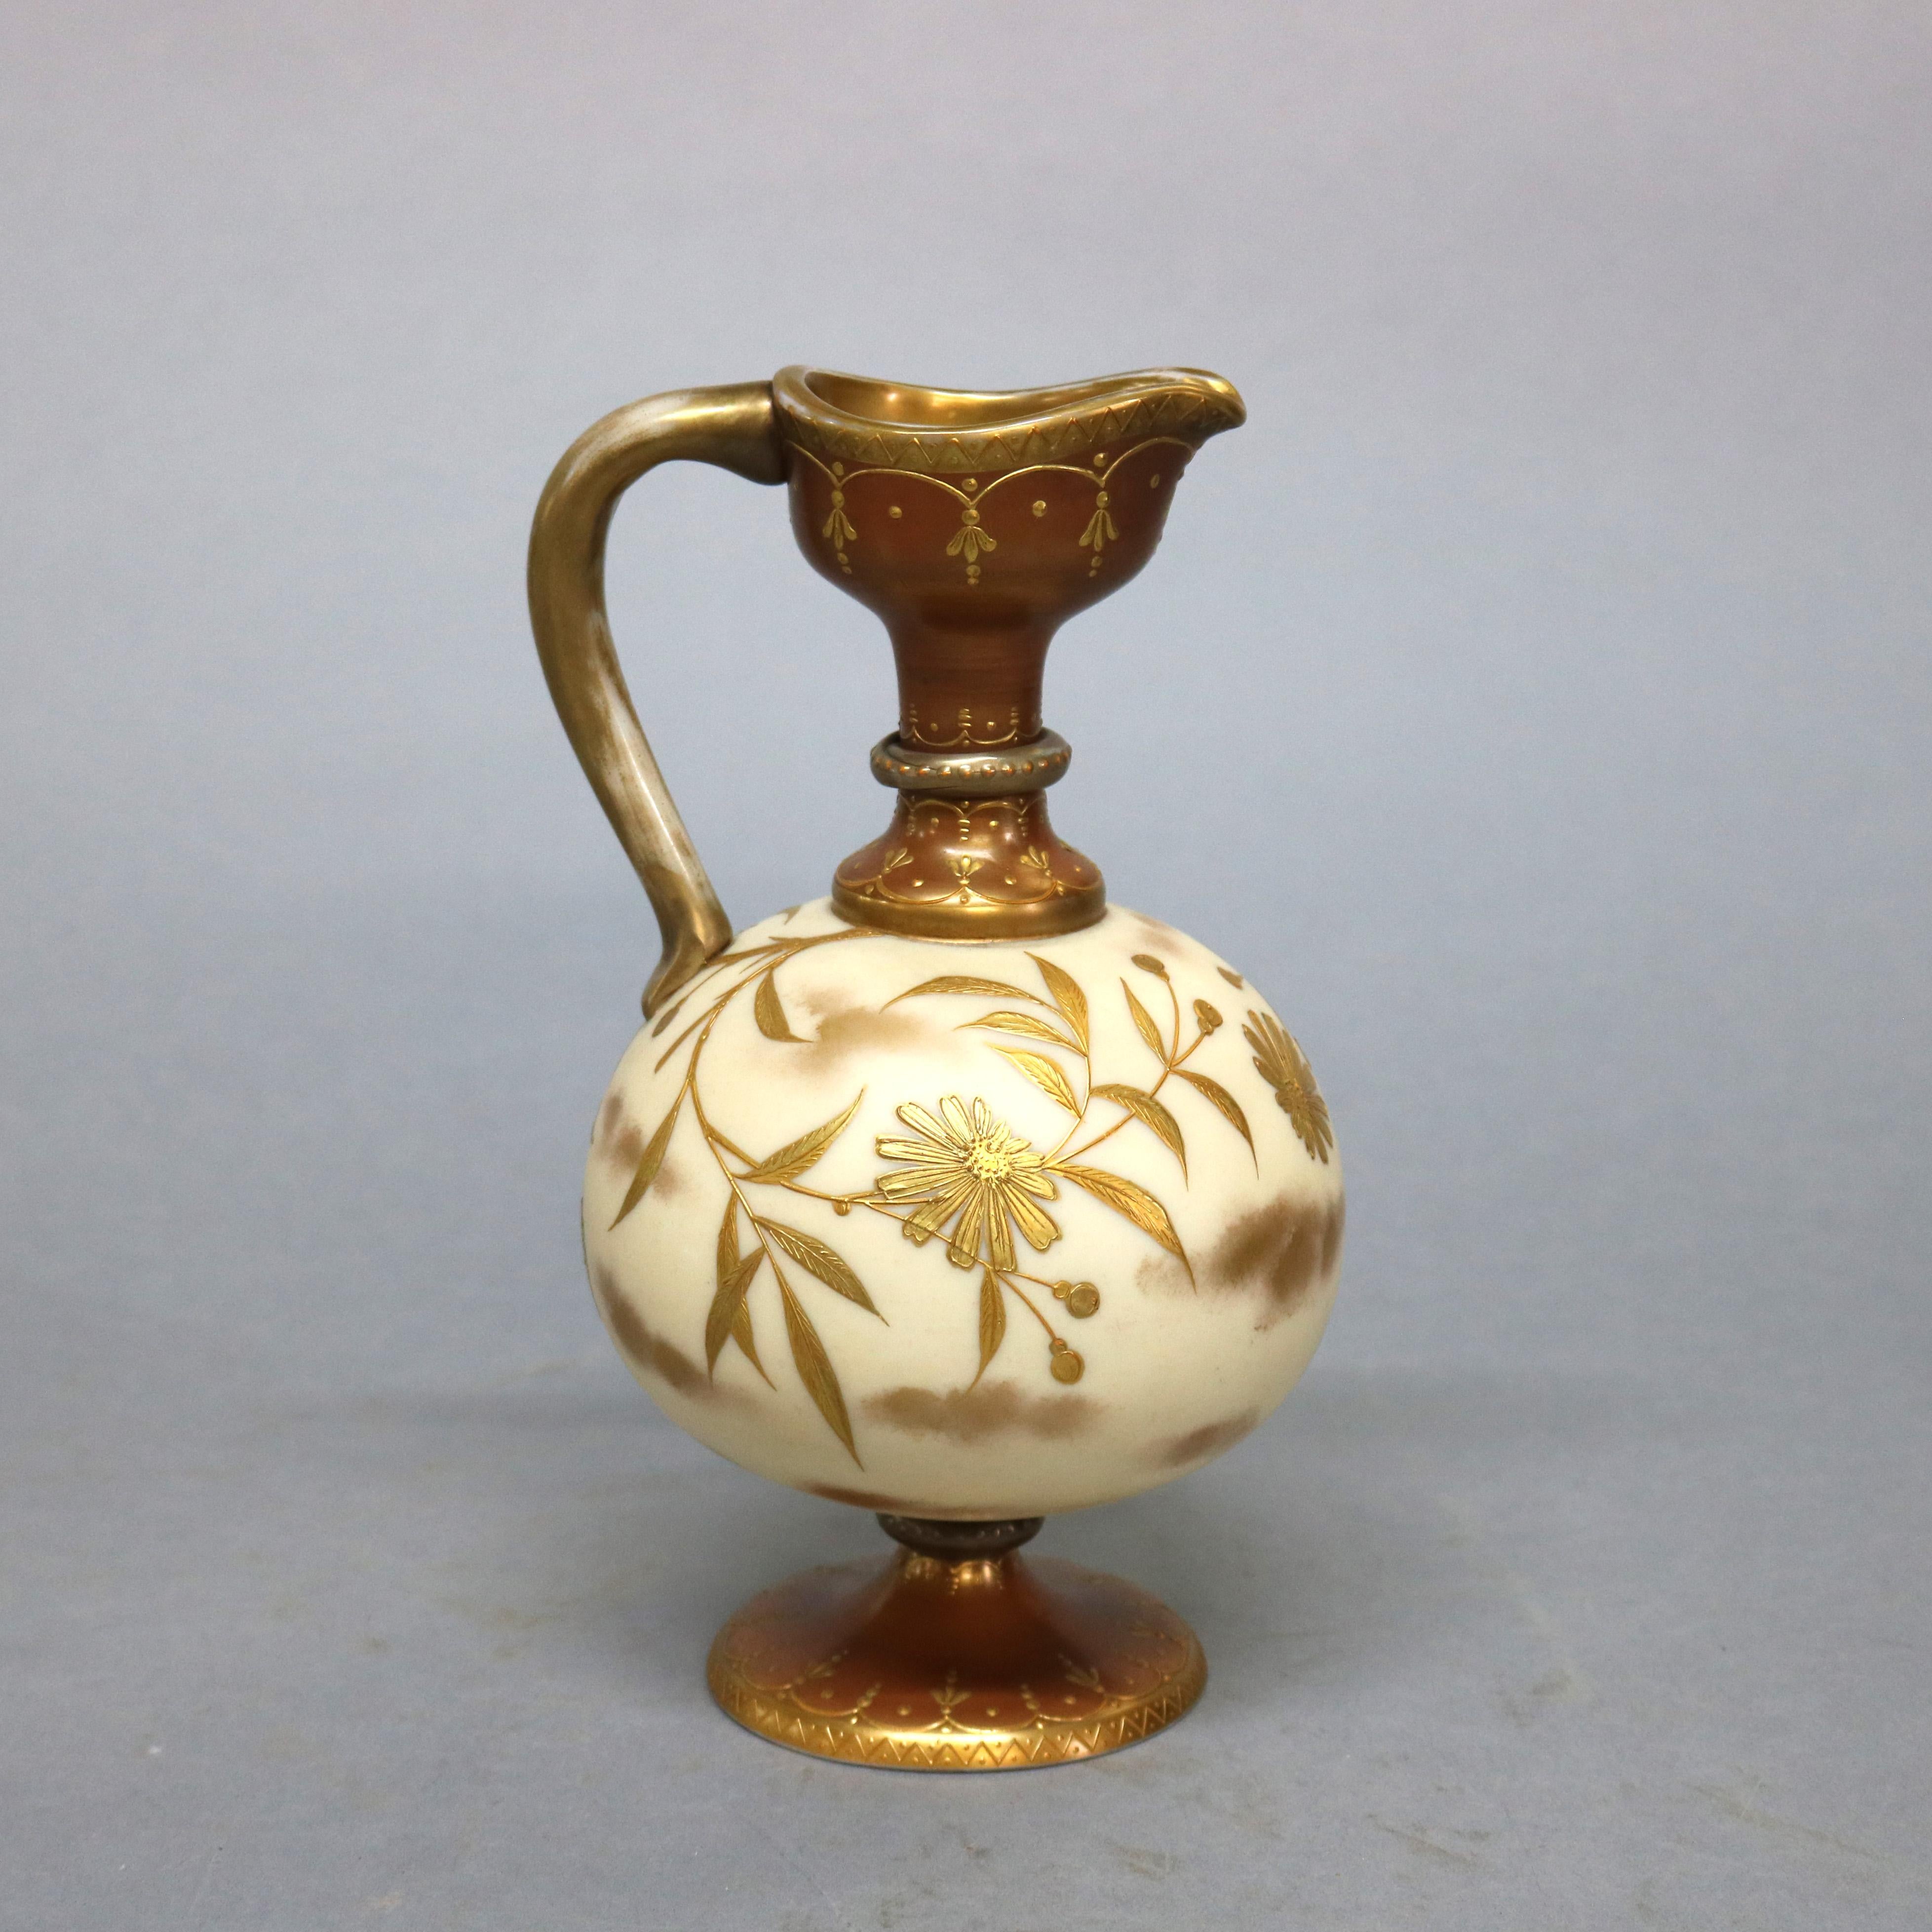 An antique Crown Milano Mt. Washington Glass ewer offers bulbous footed vessel with foliate and floral gilt decoration throughout, numbered on base as photographed, circa 1890

Measures: 10.25